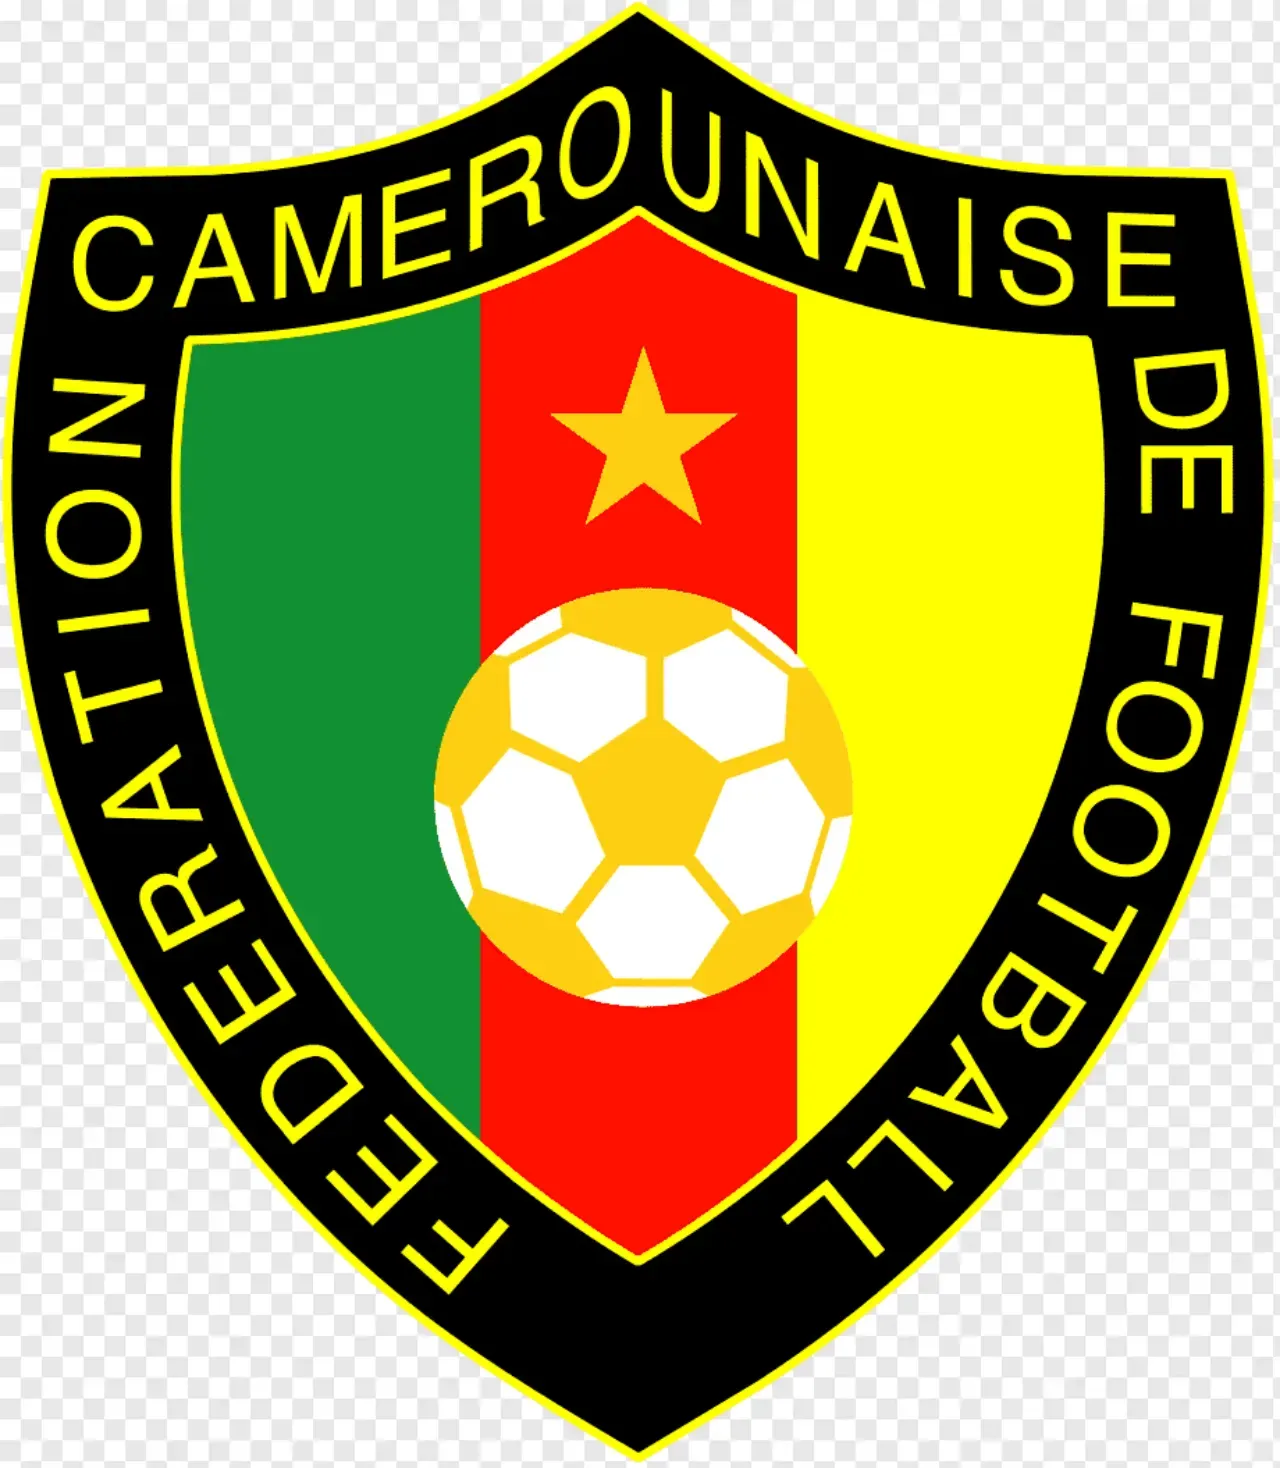 What Are The Rules For Promotion and Relegation in Cameroon Football Leagues?